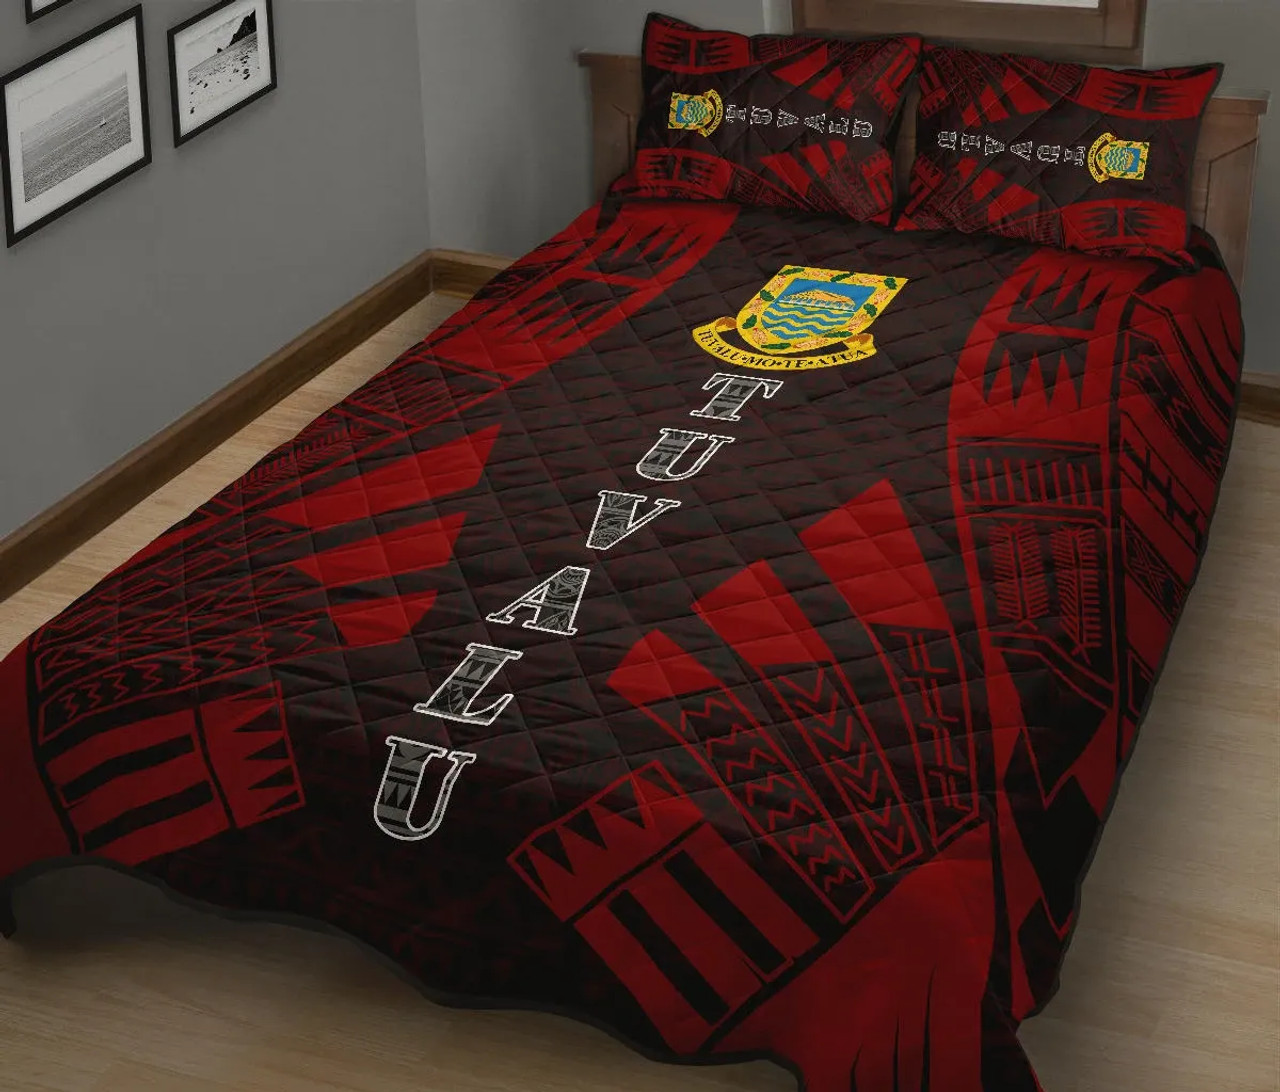 Tuvalu Quilt Bed Set - Tuvalu Coat Of Arms Red Tattoo Style 3